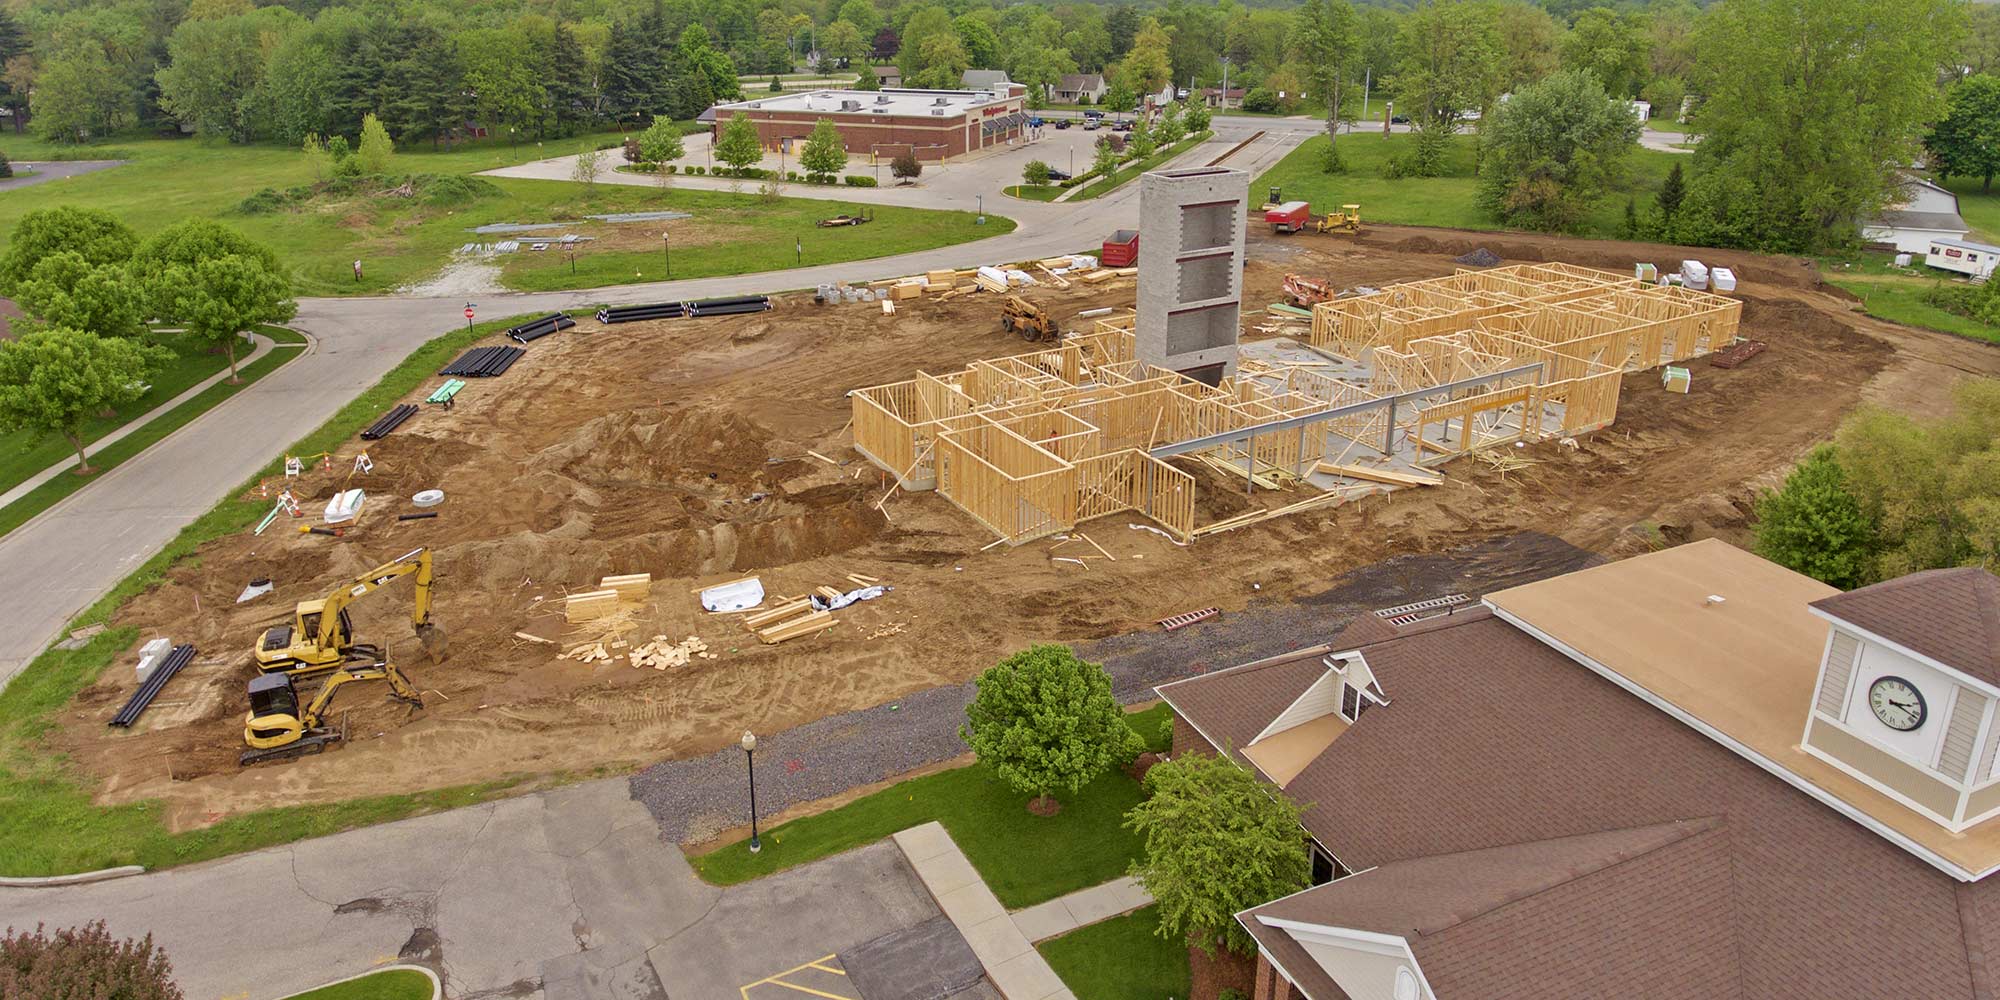 Portfolio of commercial construction projects including office space and retail in Goshen, Elkhart, Middlebury, Warsaw, Mishawaka and South Bend, Indiana.